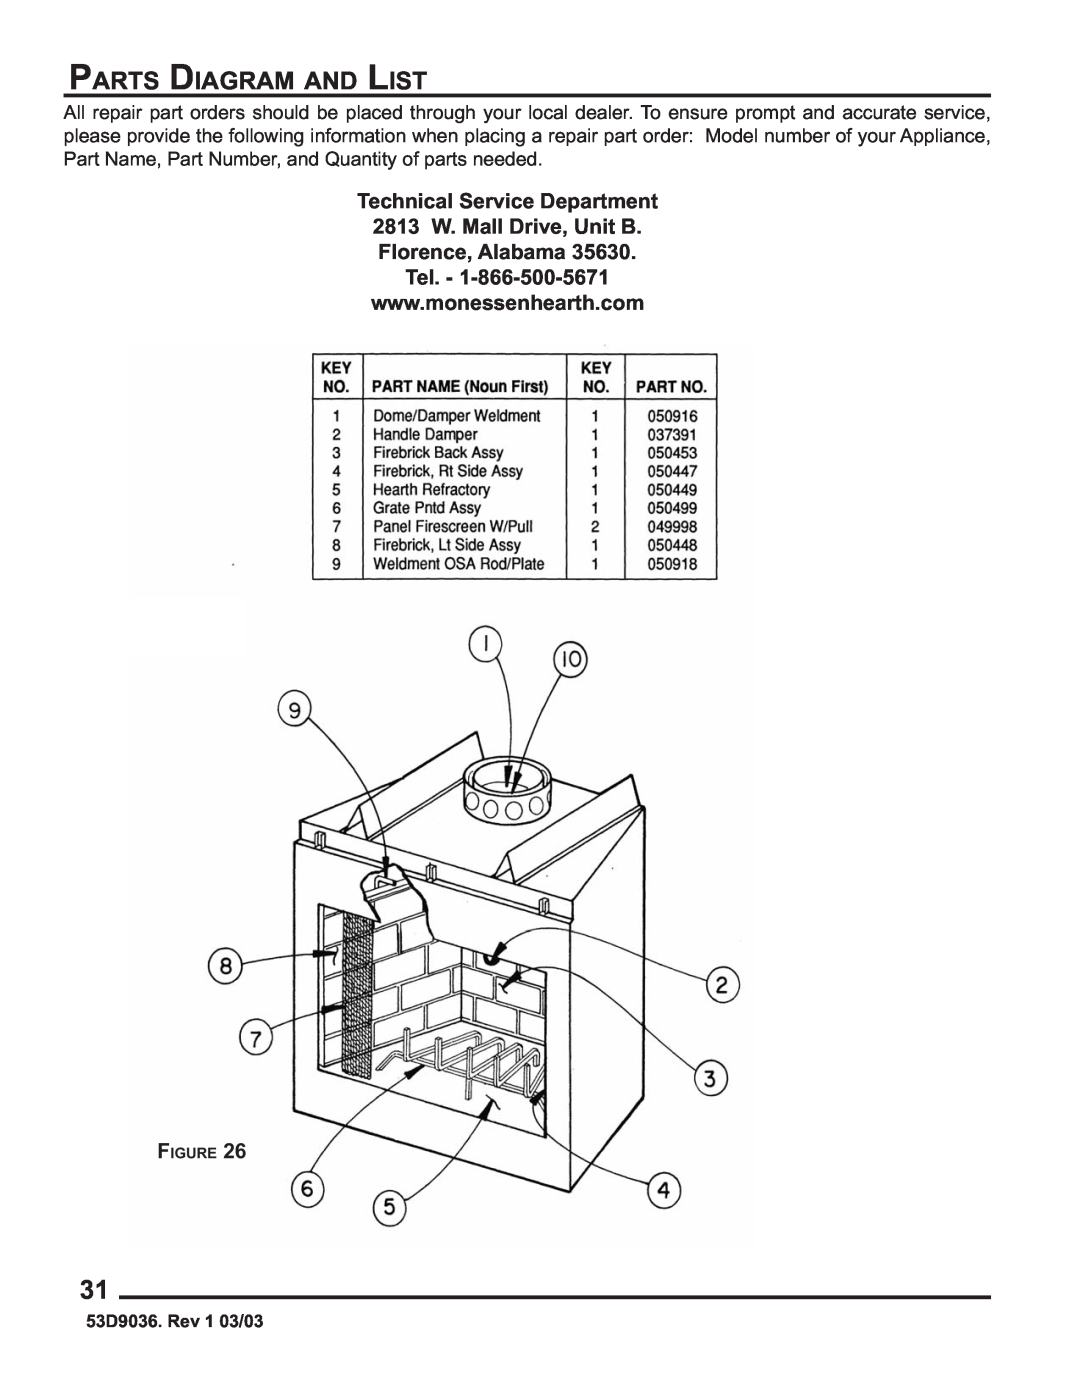 Monessen Hearth HWB700HB manual Parts Diagram And List, Technical Service Department 